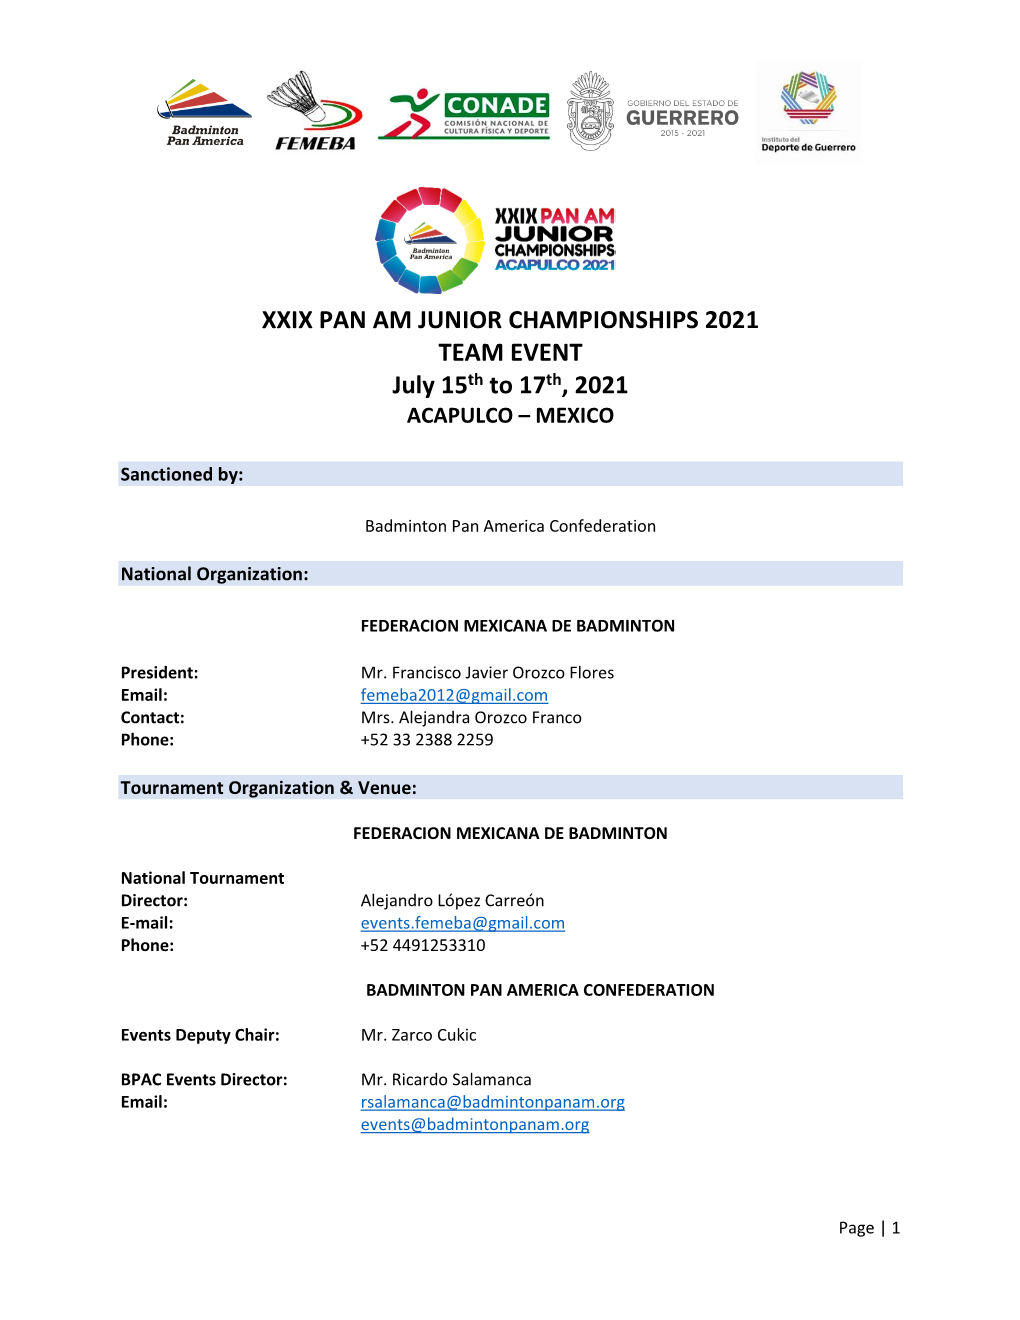 XXIX PAN AM JUNIOR CHAMPIONSHIPS 2021 TEAM EVENT July 15Th to 17Th, 2021 ACAPULCO – MEXICO